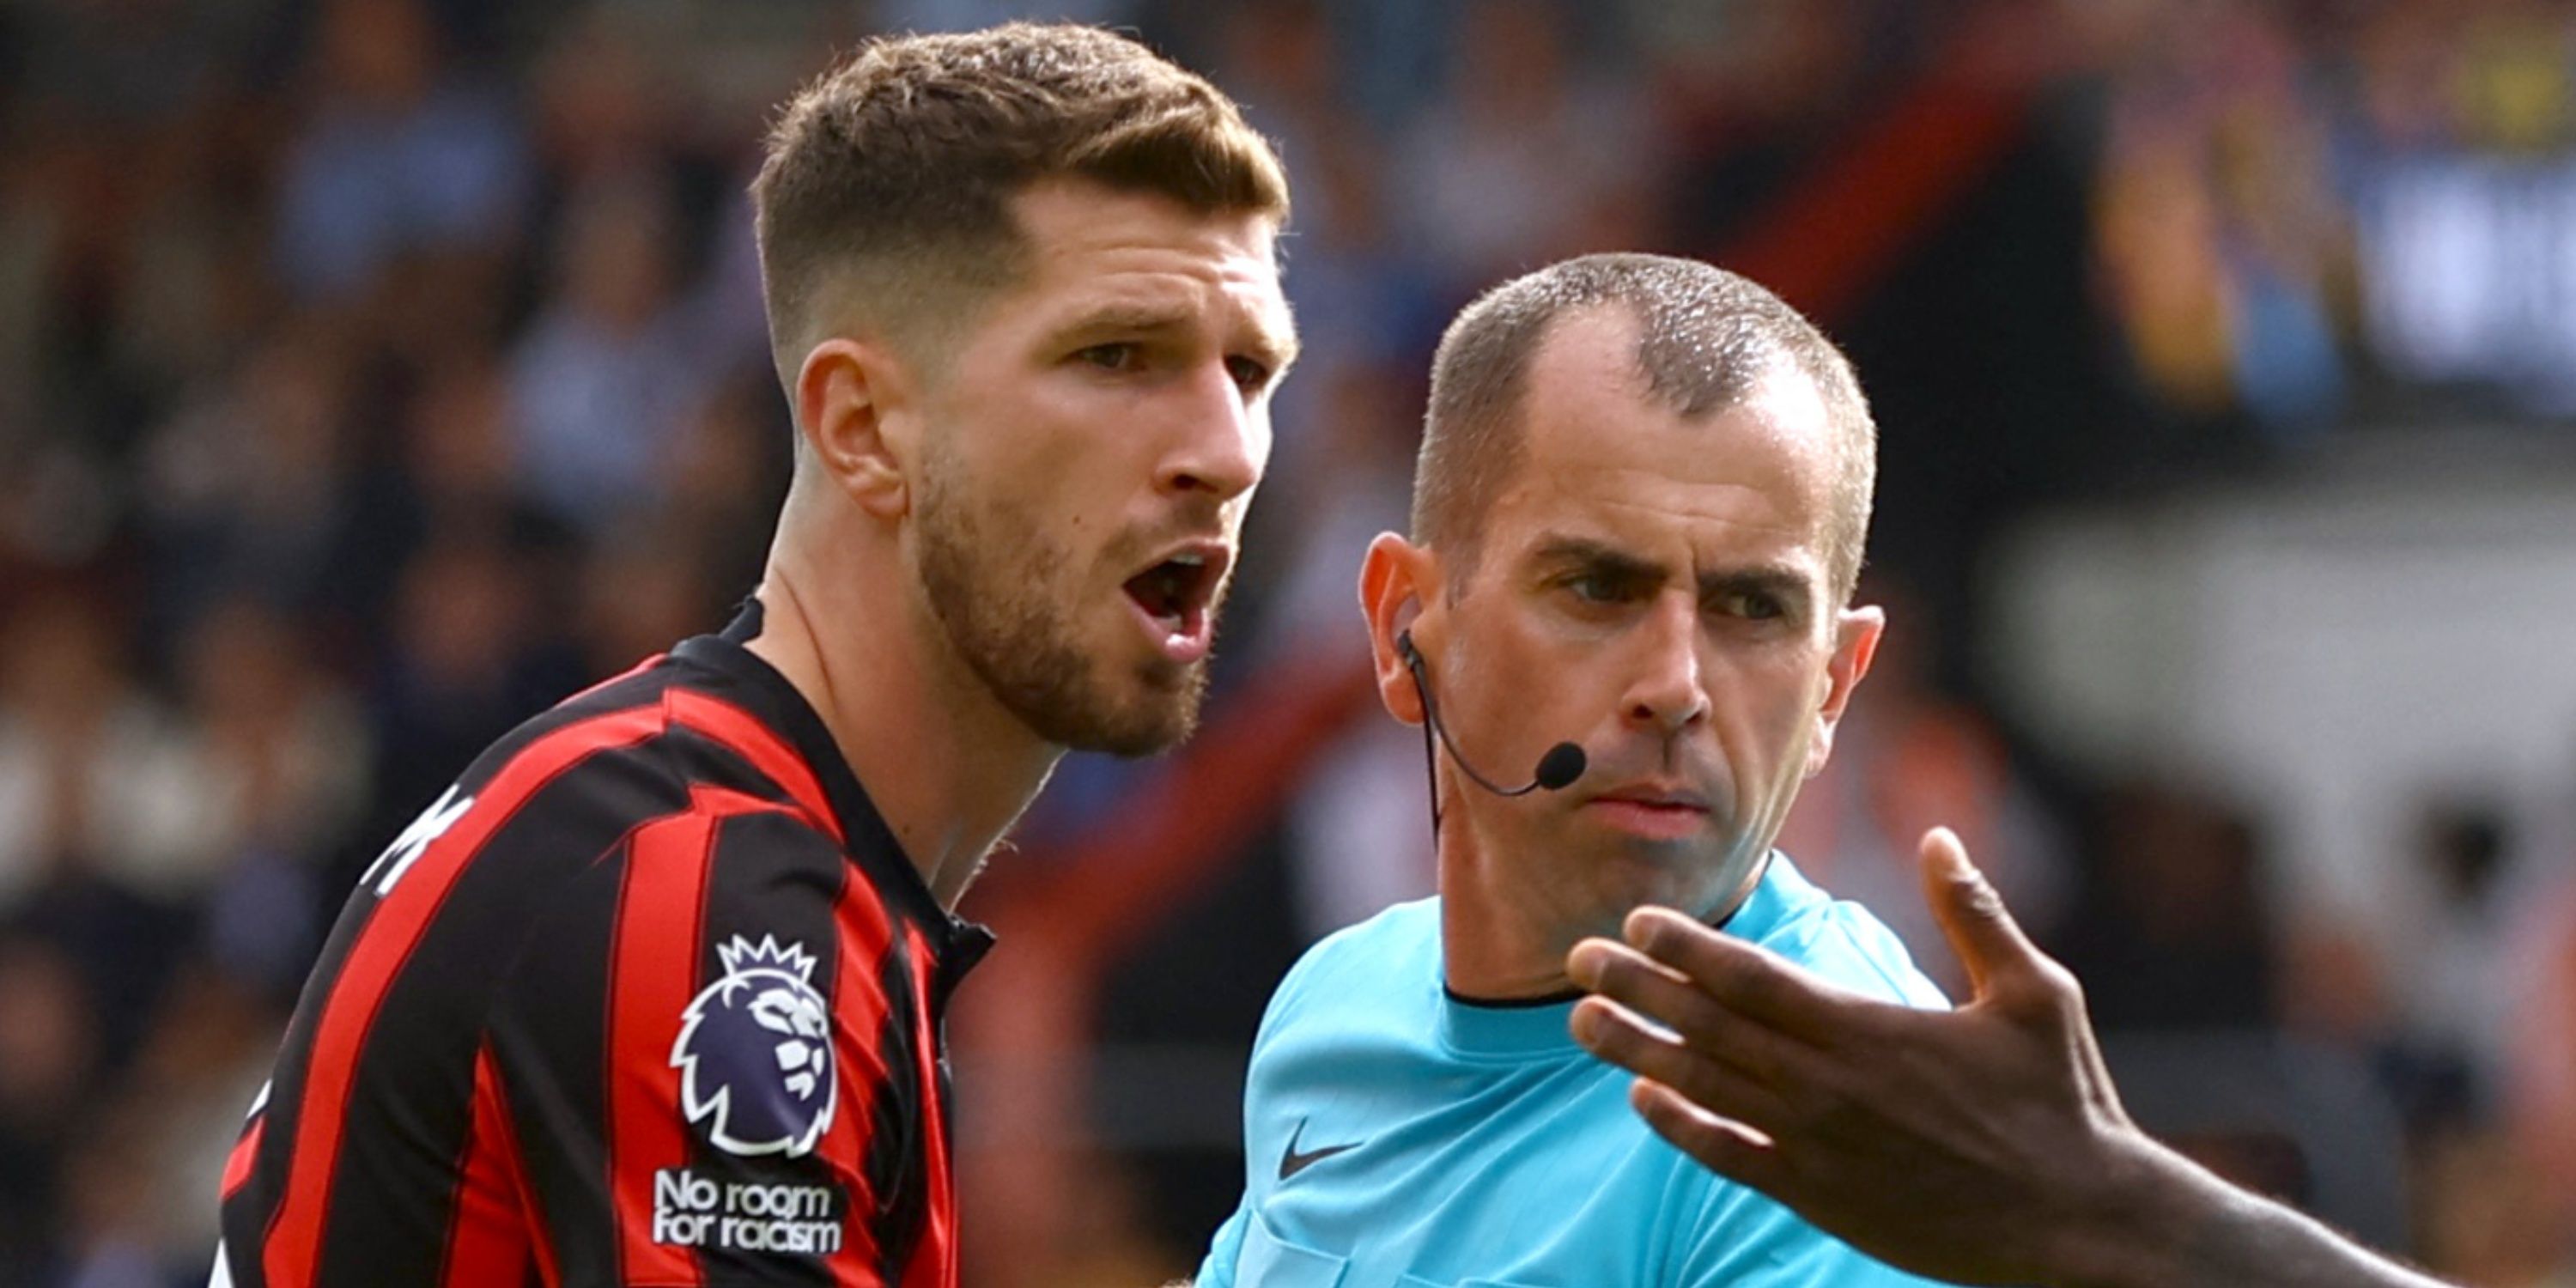 AFC Bournemouth's Chris Mepham remonstrates with referee Peter Bankes